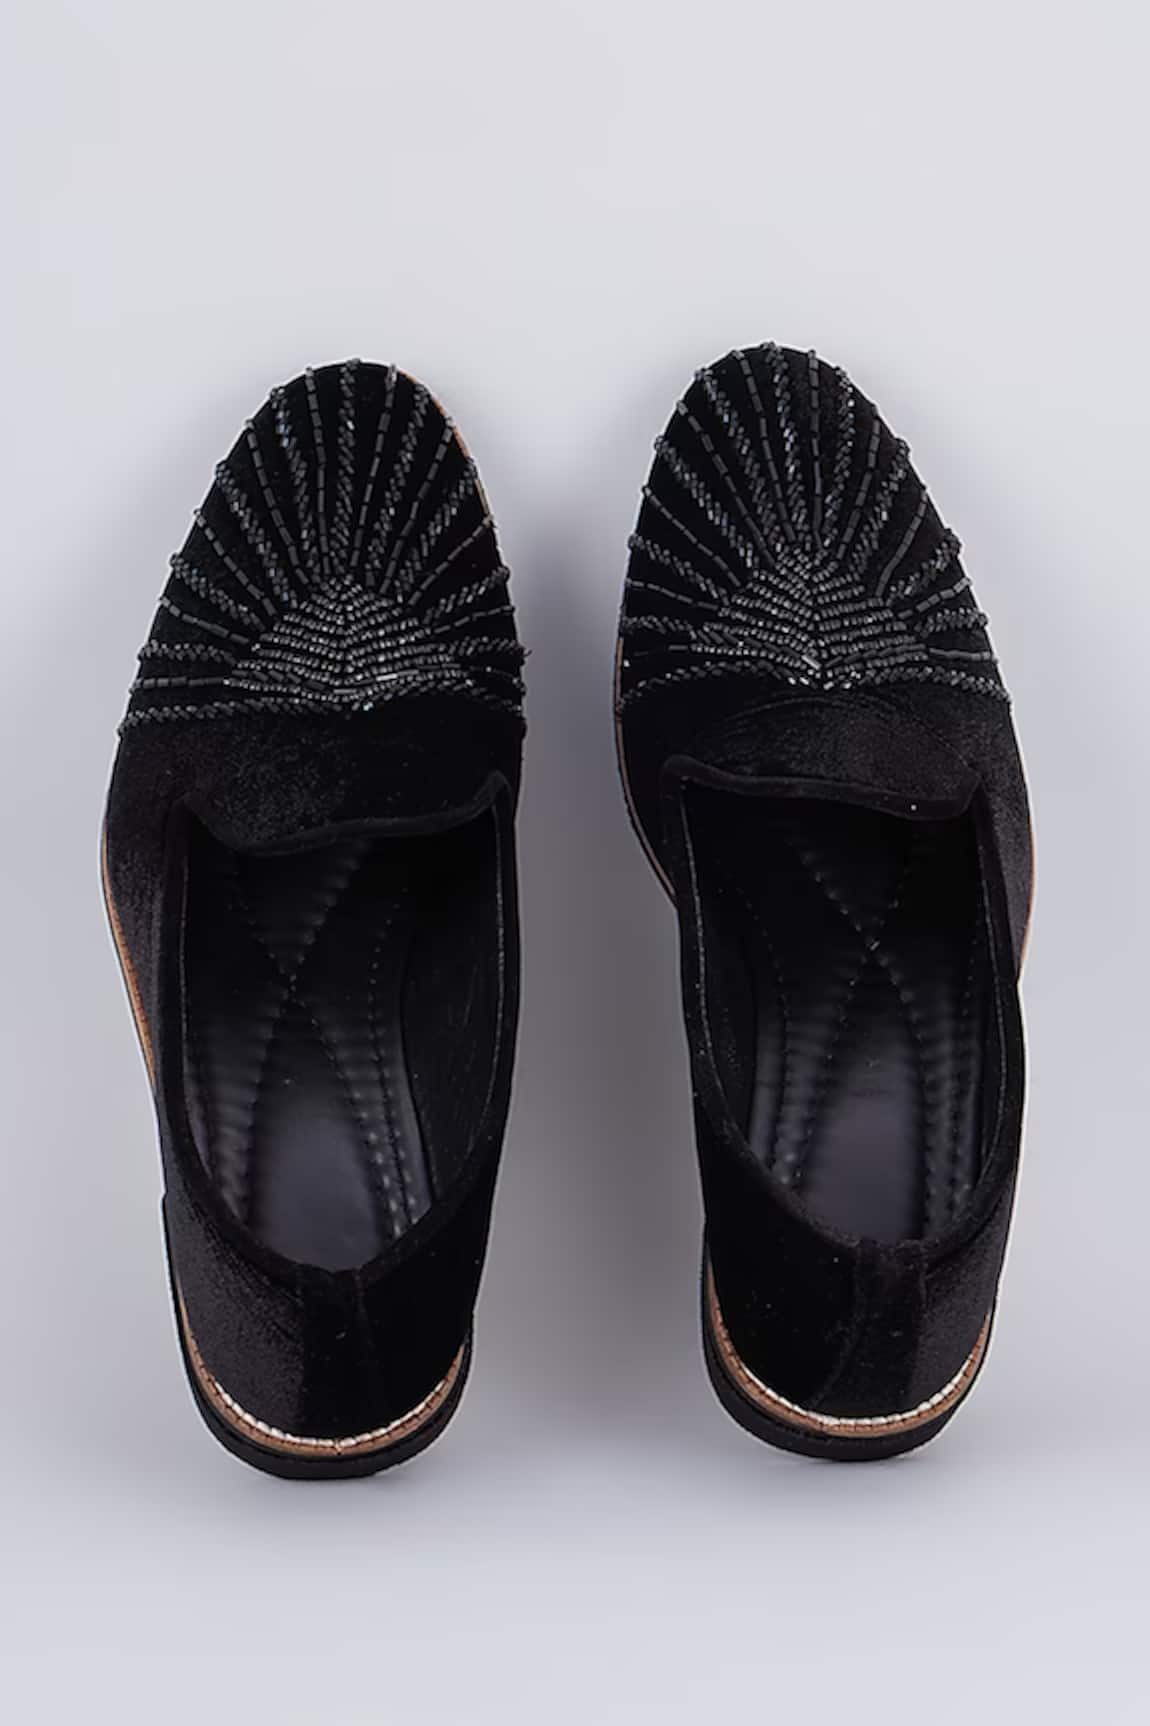 RNG Safawala Cutdana Hand Embroidered Leather Loafers